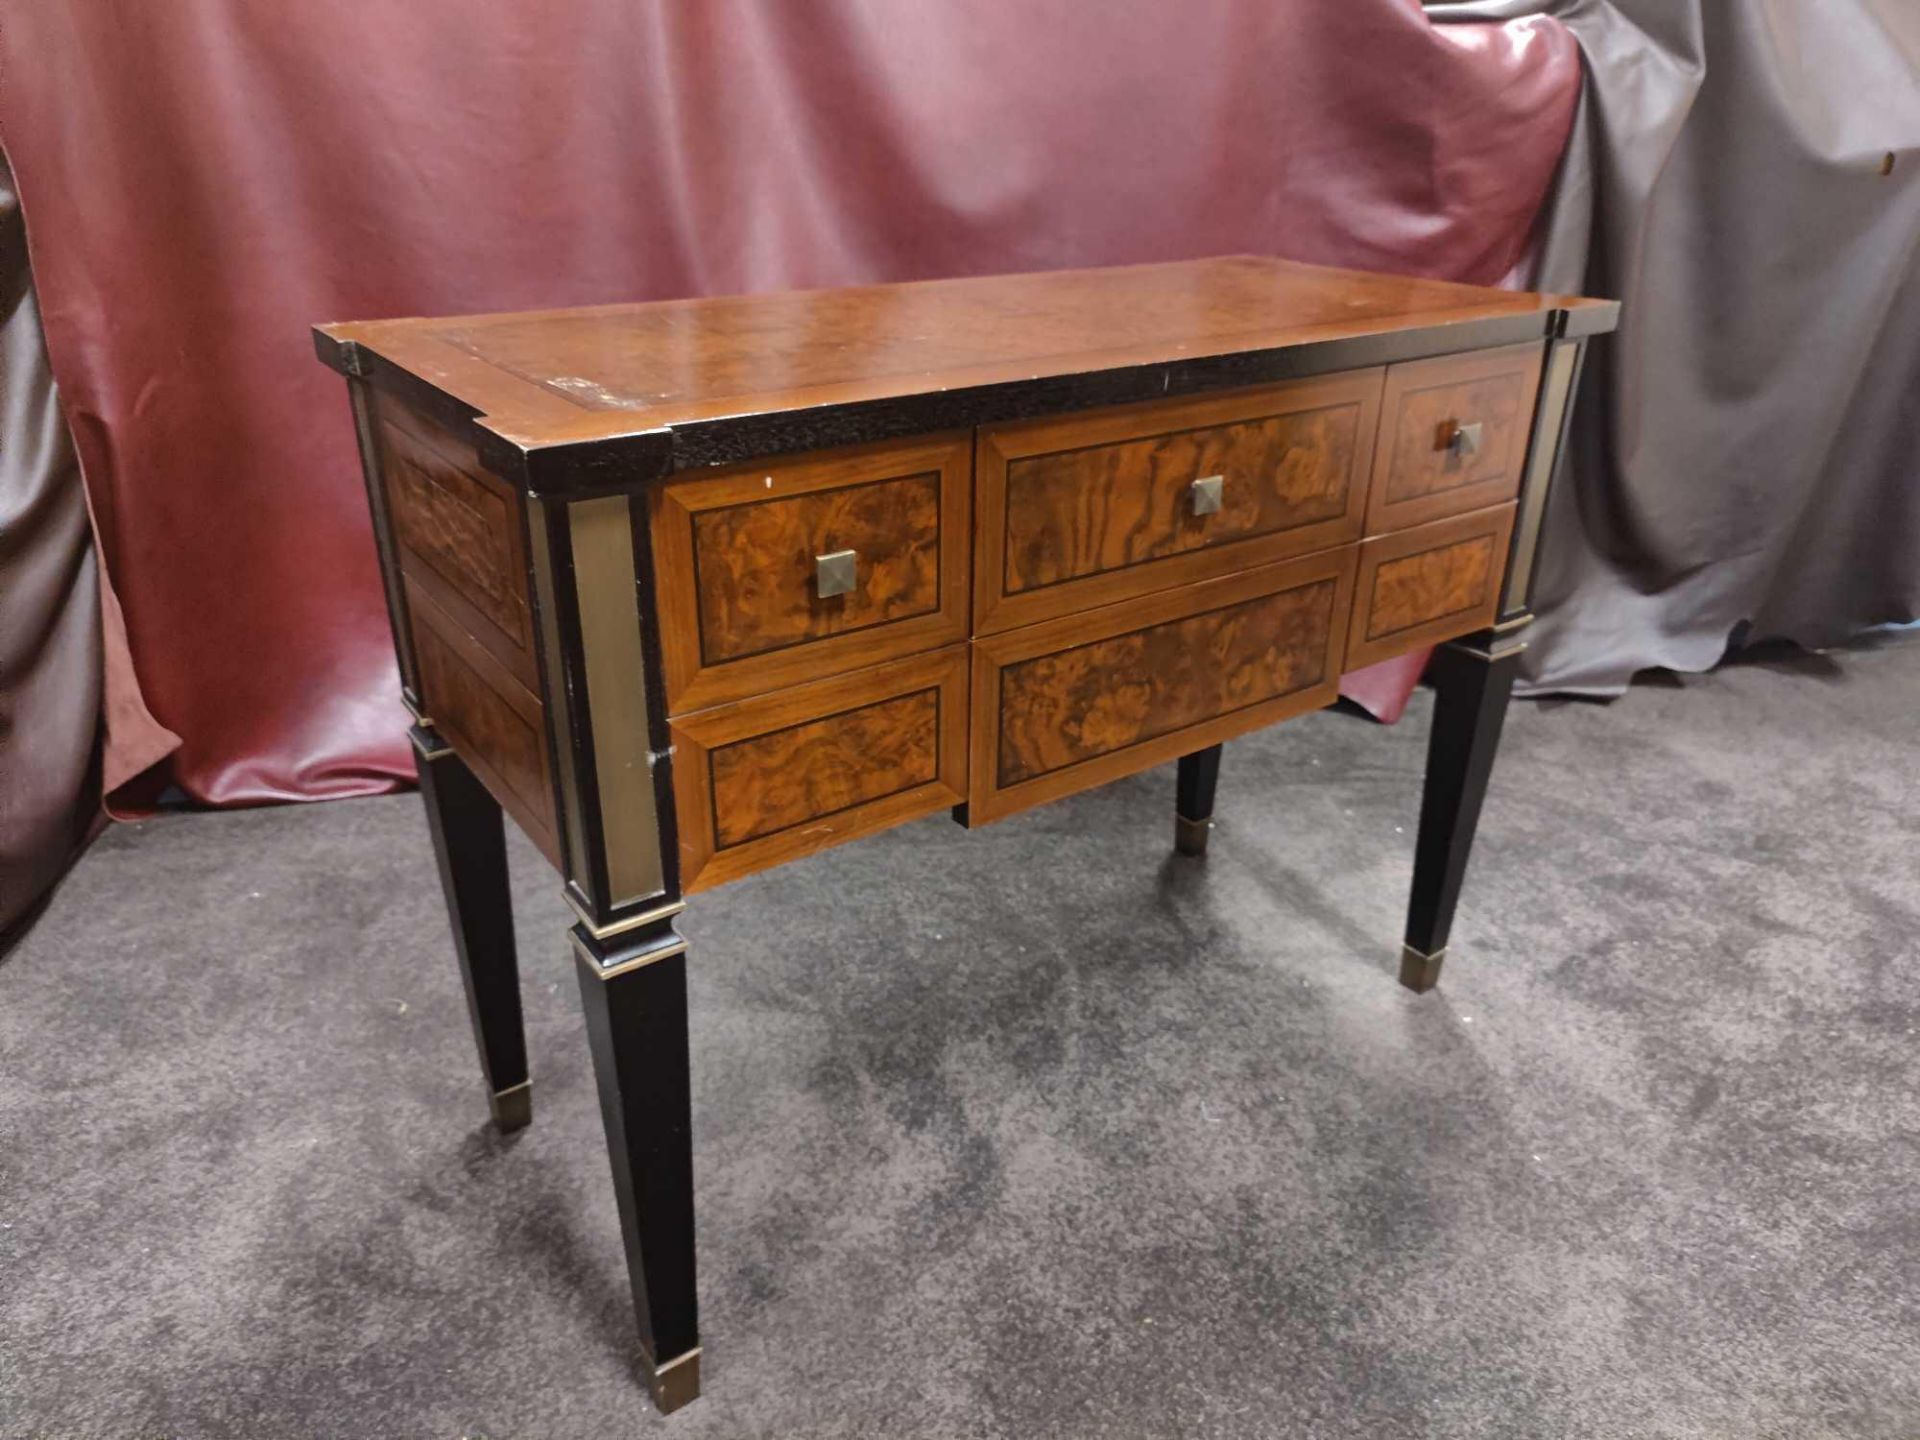 A Burr Mahogany And Gold Trim Hall Table With Two Drawers And A Faux Drawer Mounted On Tapered - Image 2 of 3